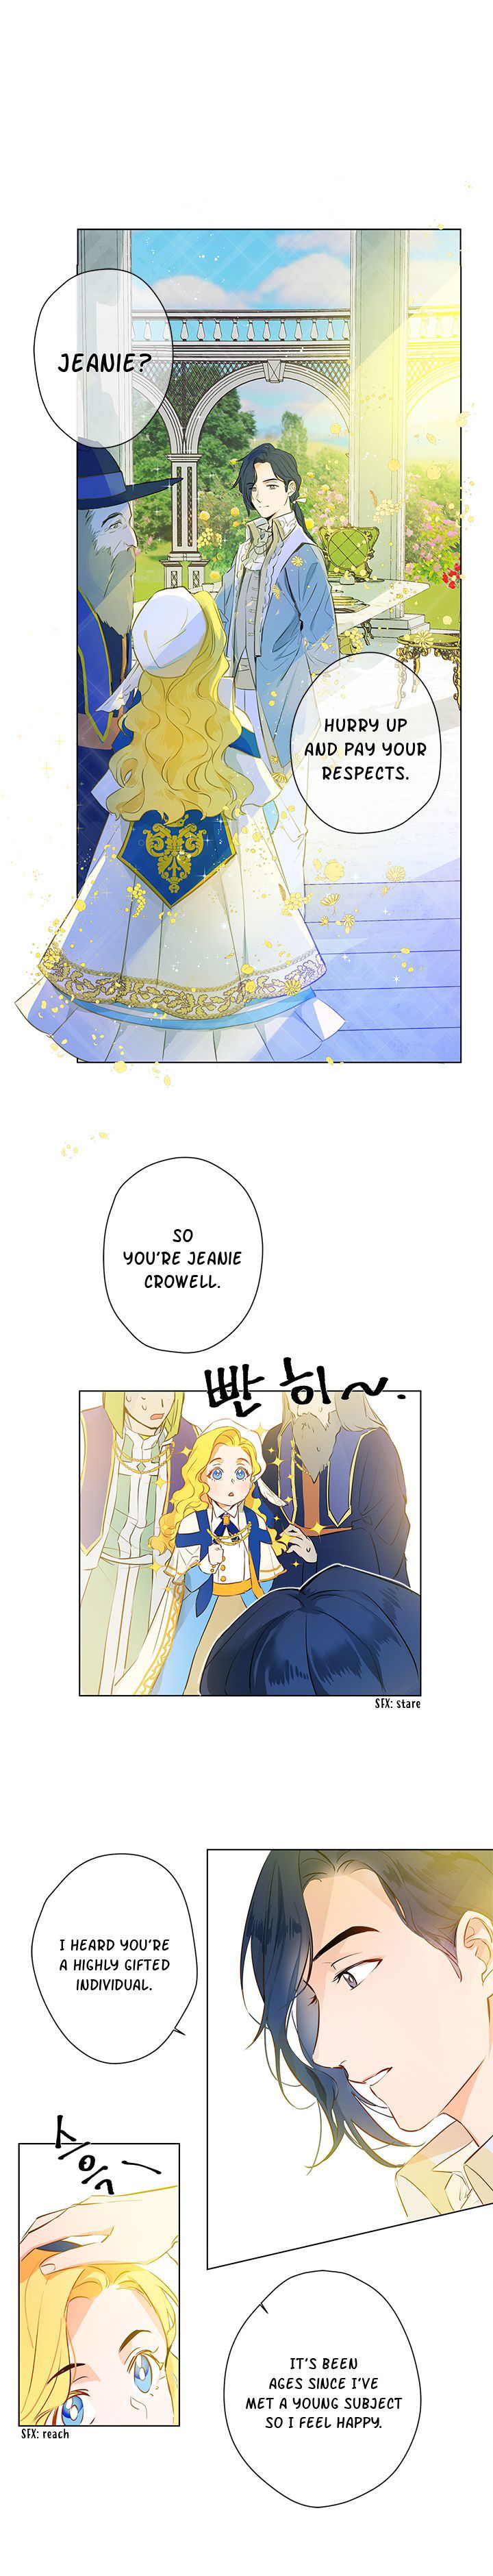 the-golden-haired-elementalist-chap-7-21